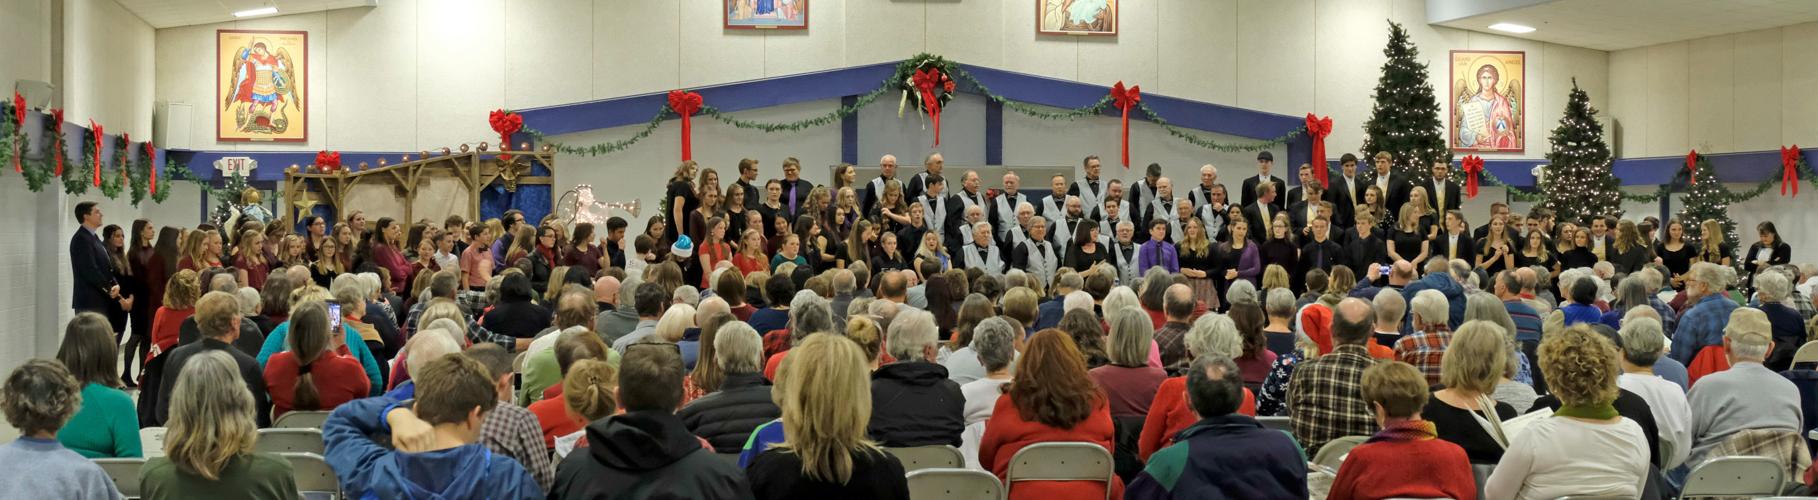 HCBC Christmas in the Pines concert packs the church